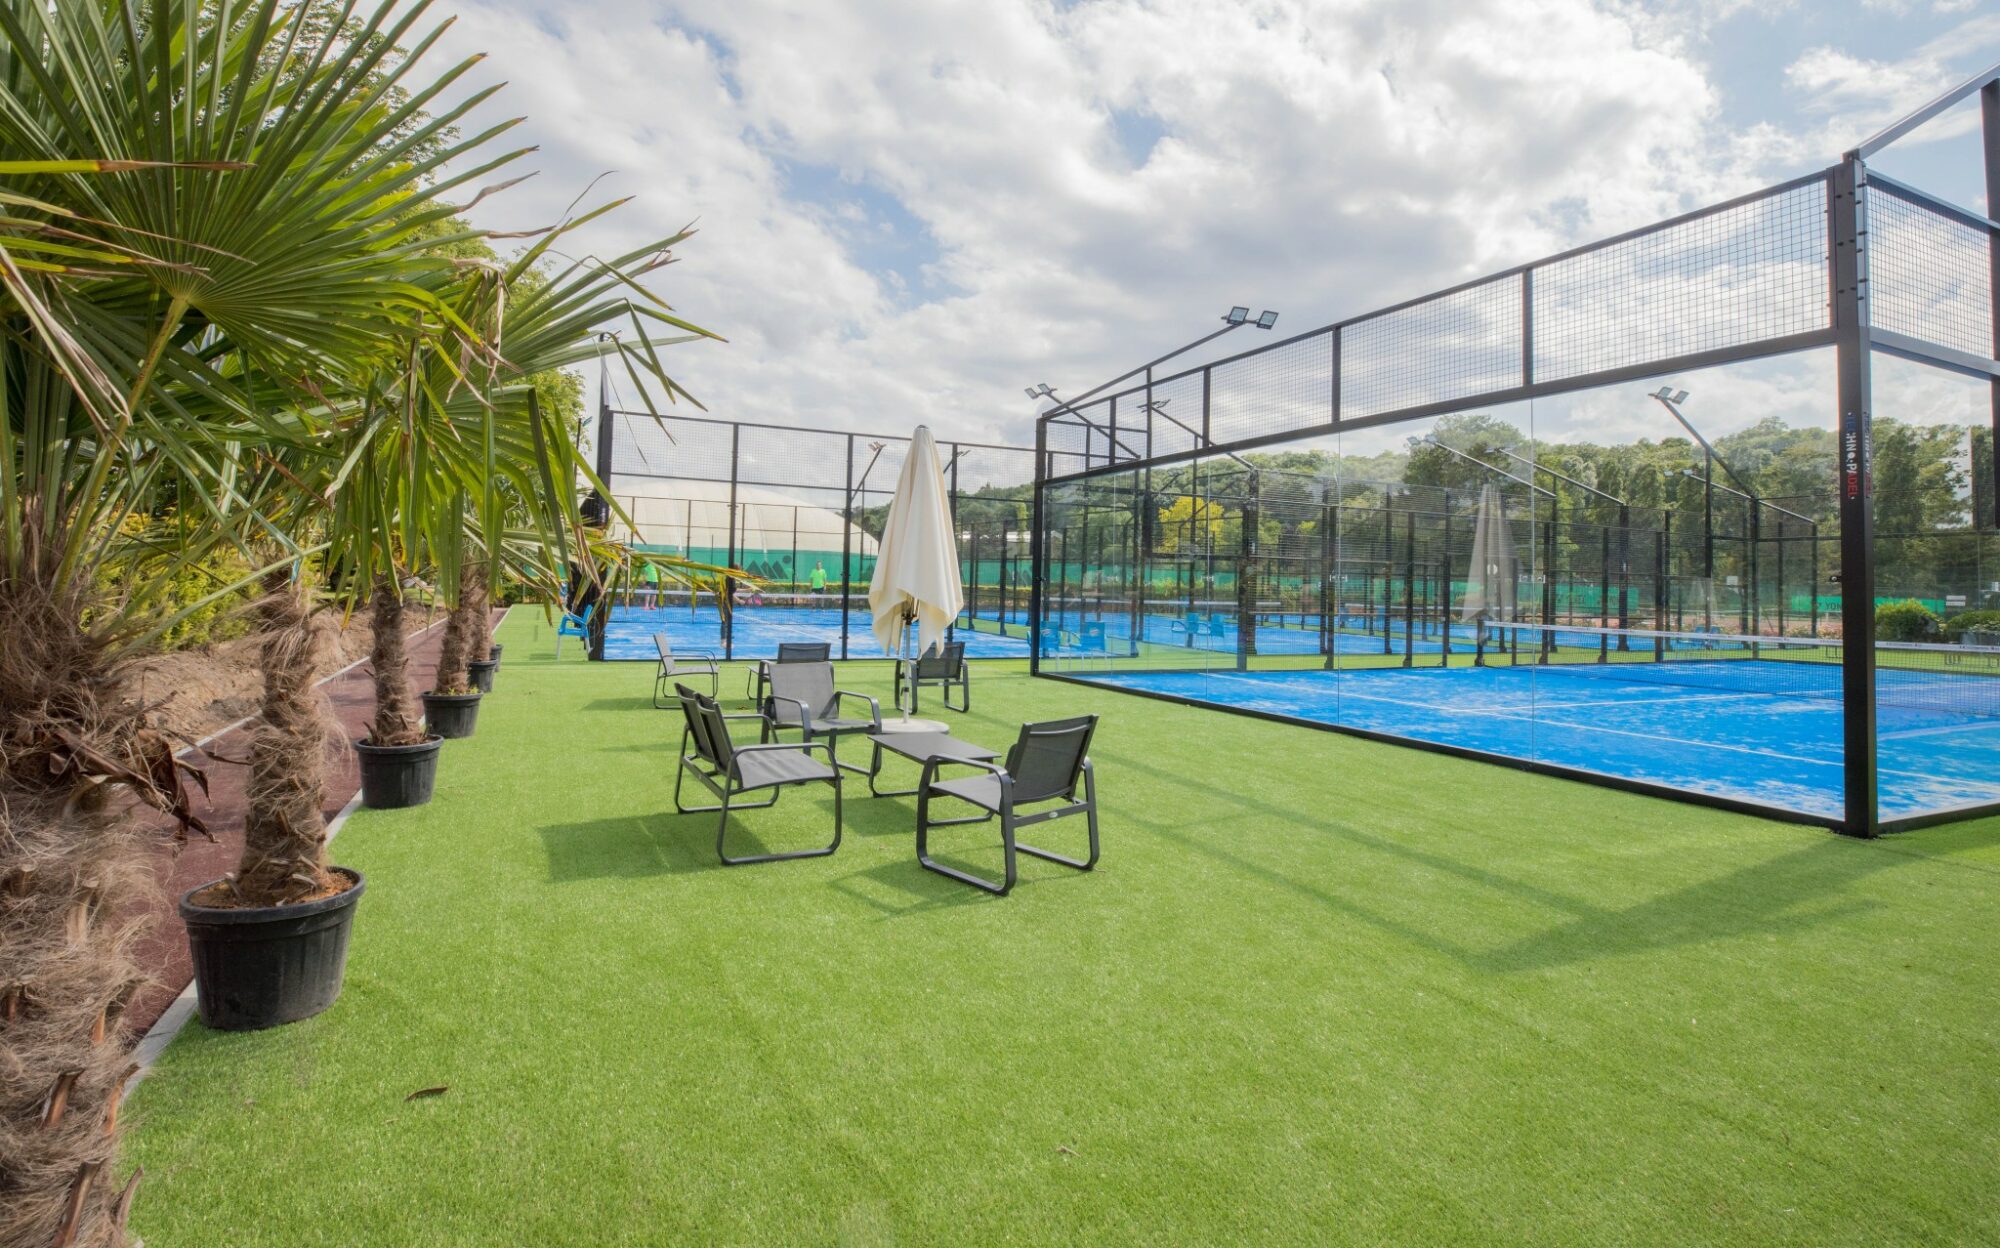 Why invest in padel ?